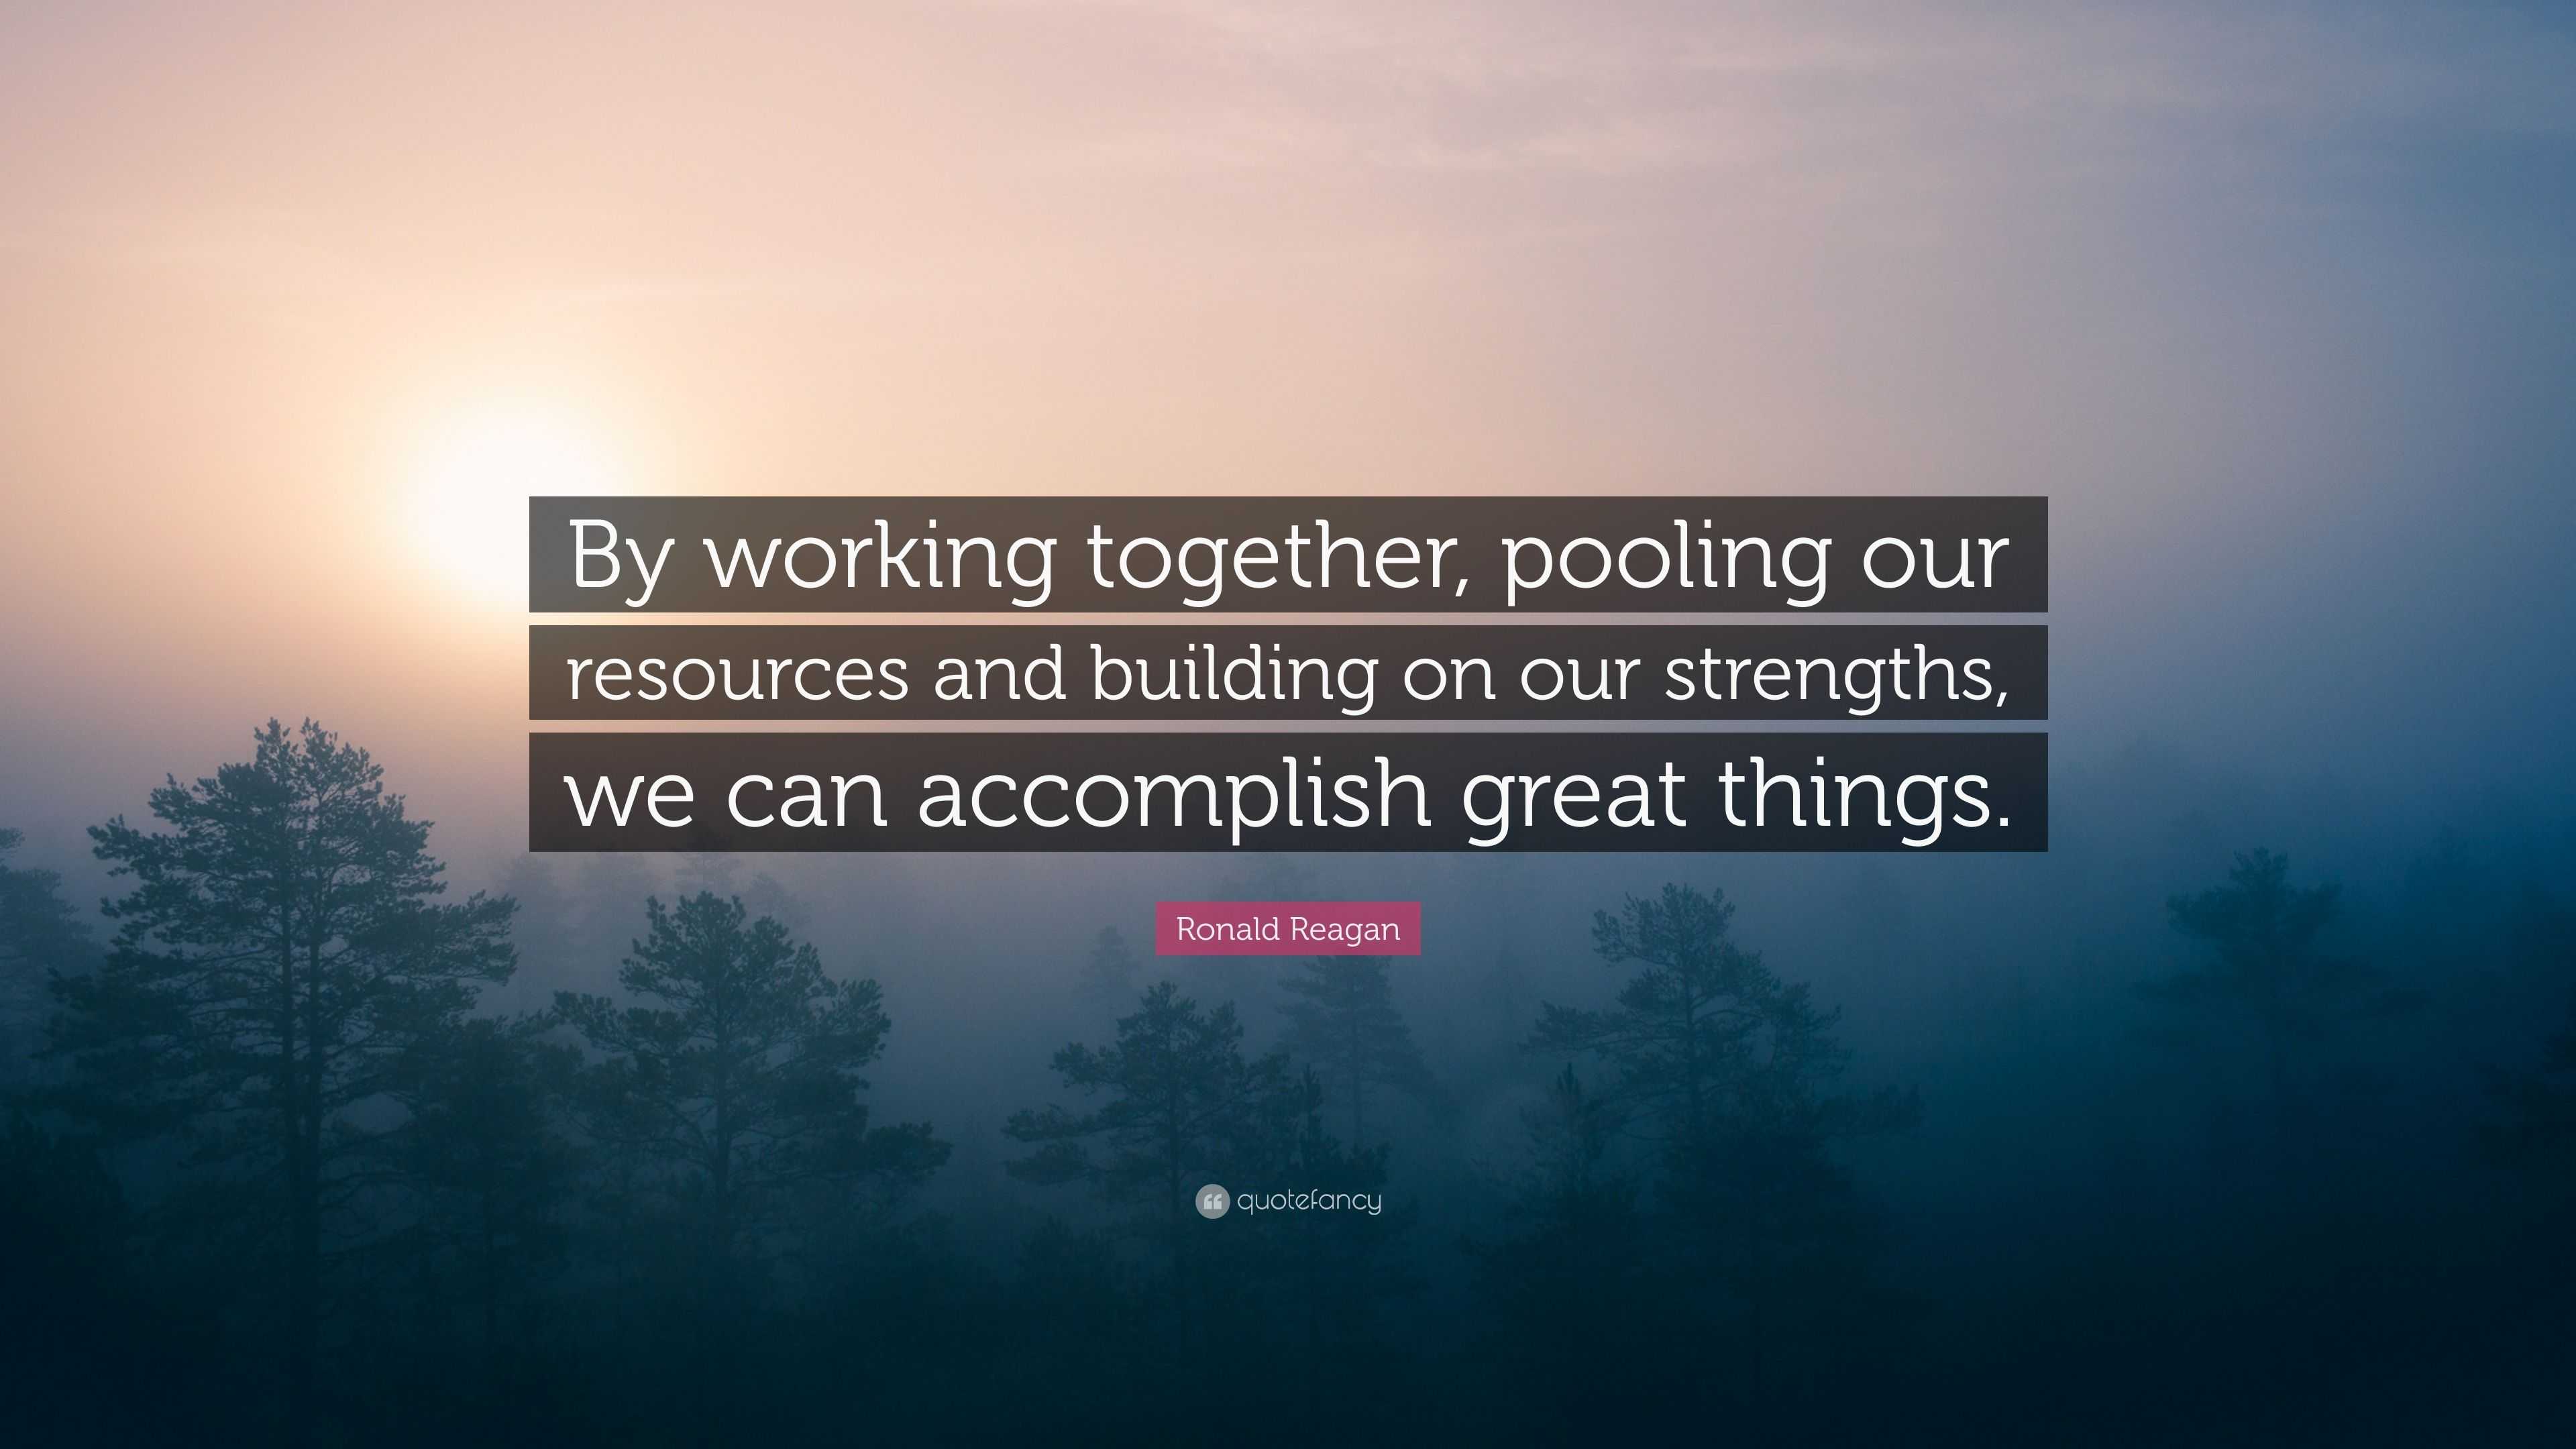 Ronald Reagan Quote: “By working together, pooling our resources and ...